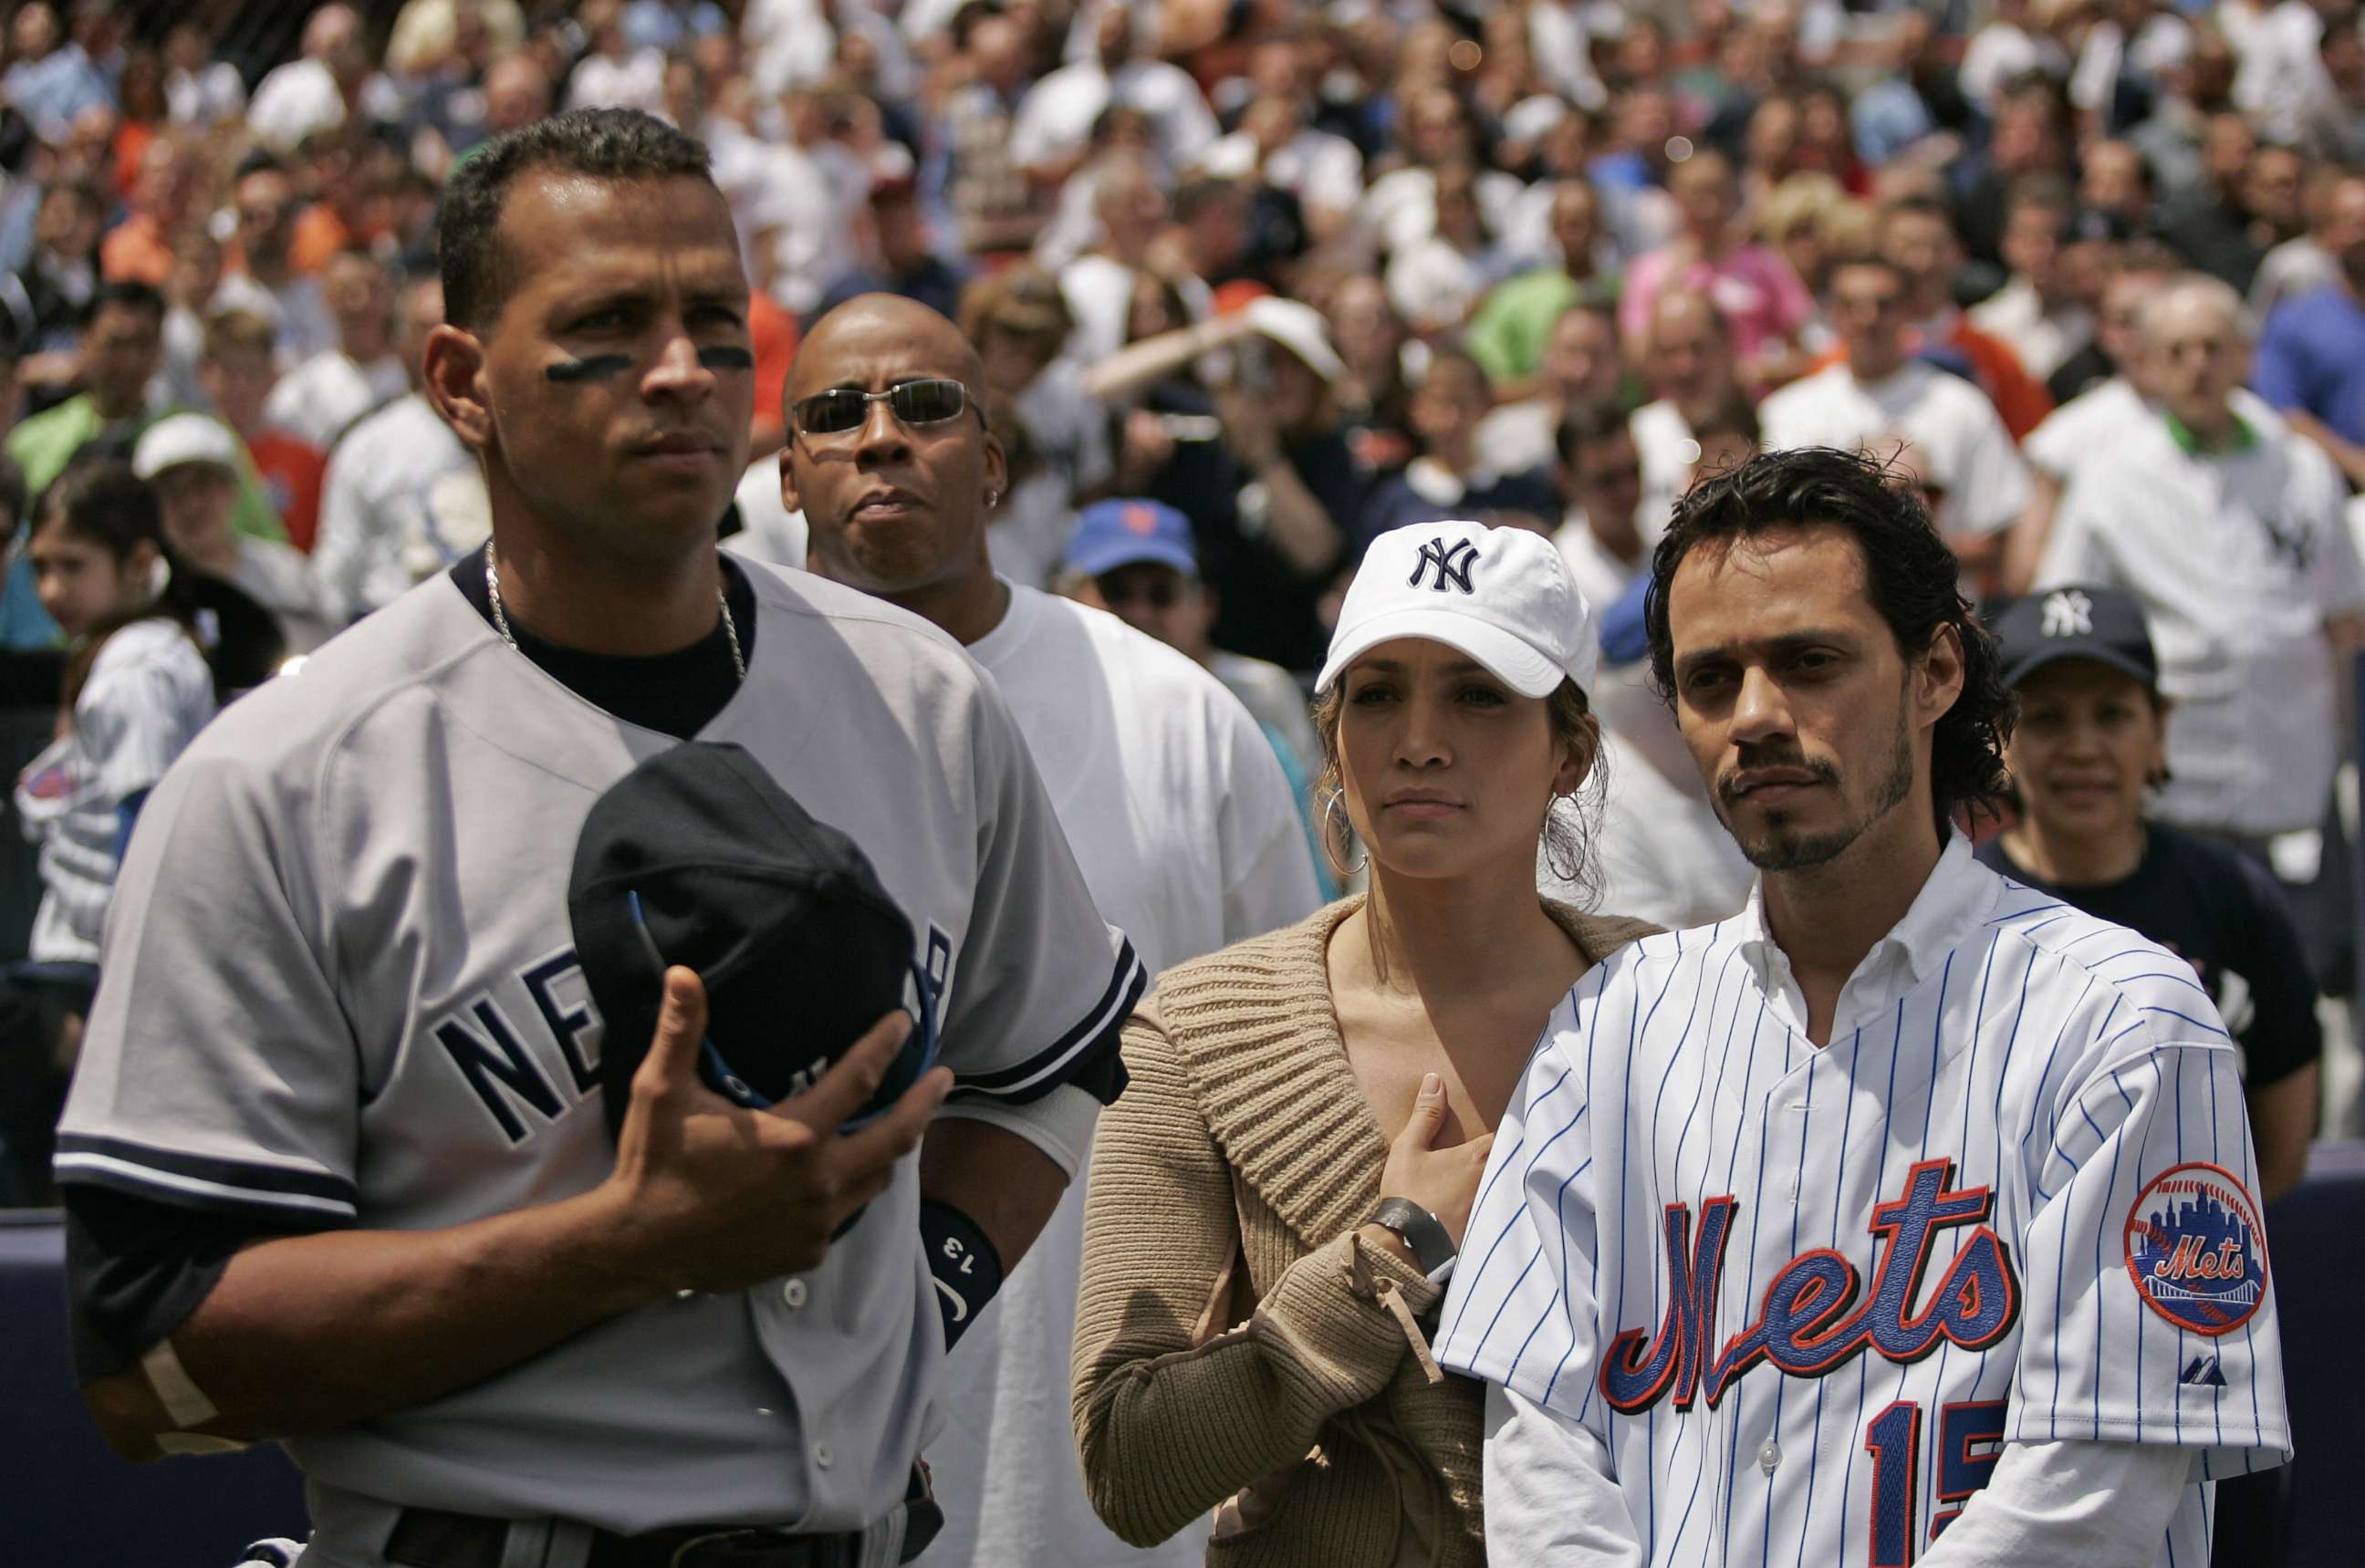 PHOTO: Actress Jennifer Lopez and husband Marc Anthony stand with New York Yankee Alex Rodriguez before a game at Shea Stadium in Queens, New York on Saturday May 21, 2005.